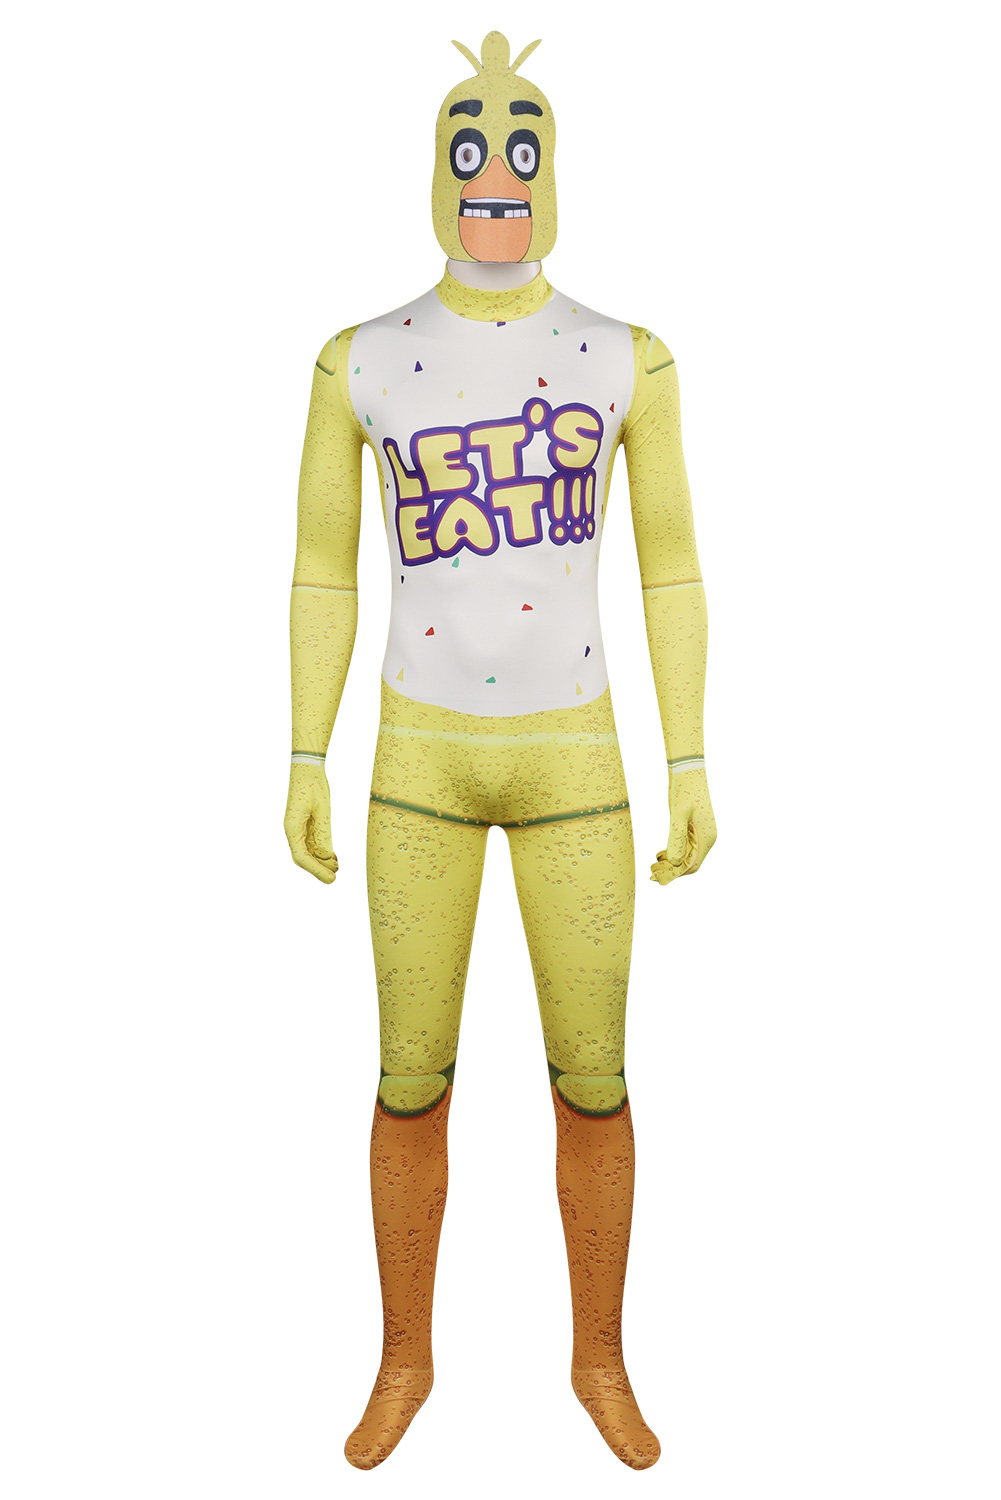 Game Five Nights at Freddy's Chica Jumpsuits Outfits Halloween Carnival Suit Cosplay Costume